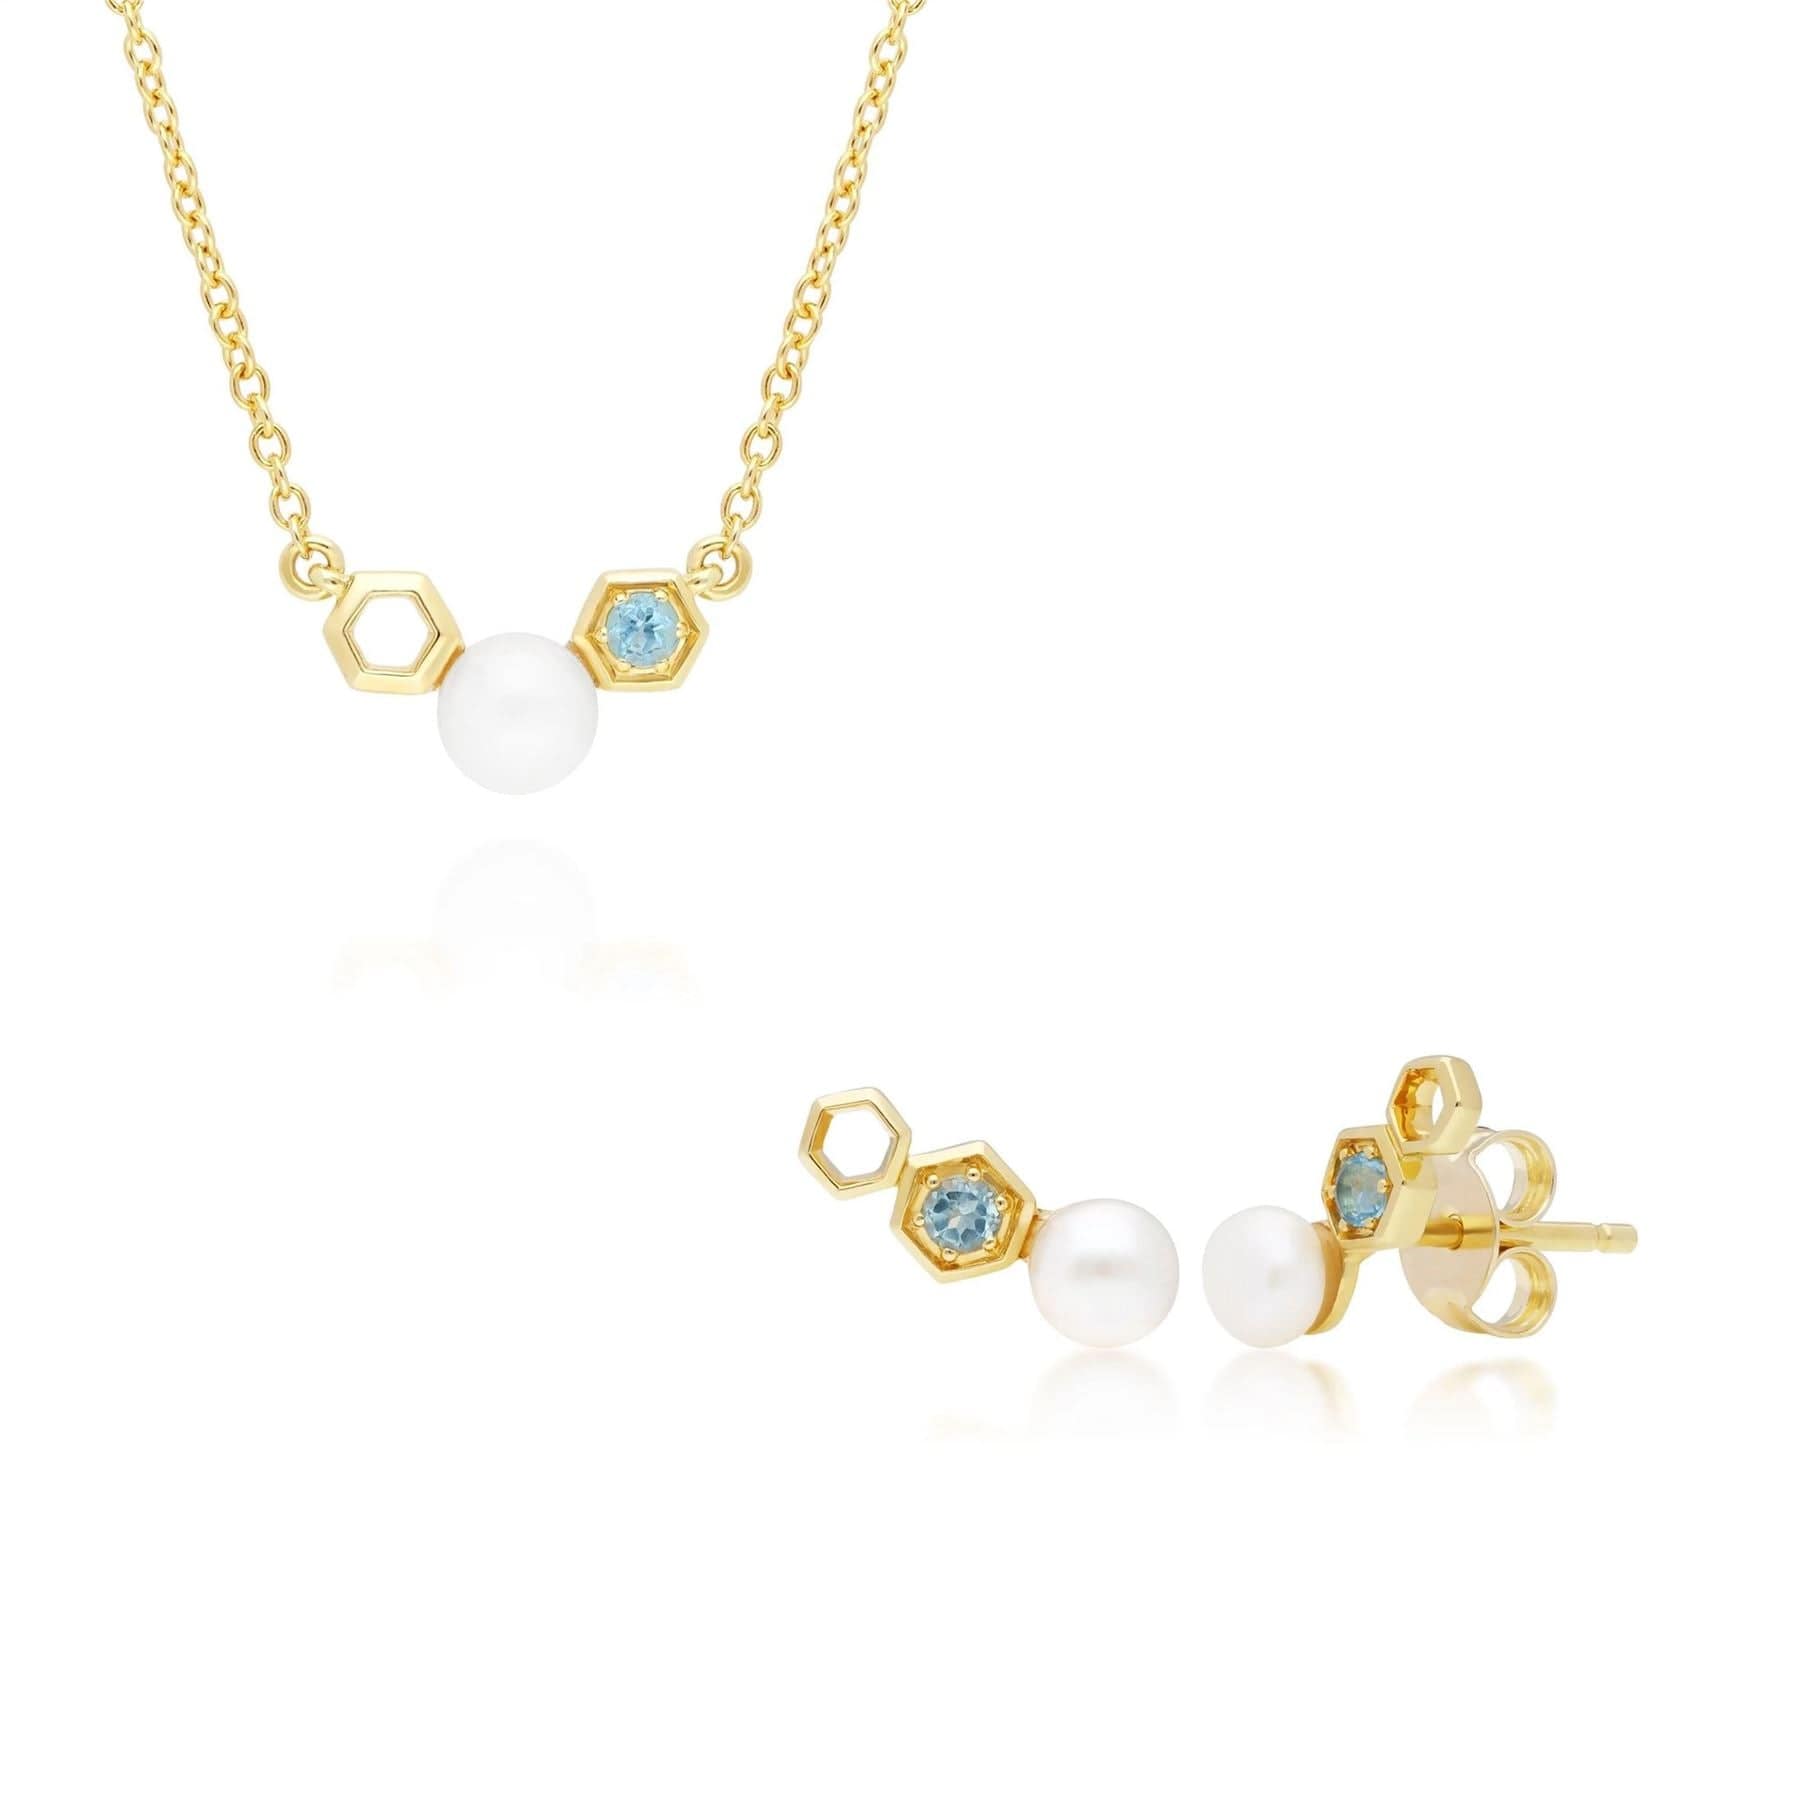 135N0362019-135E1632019 Modern Pearl & Blue Topaz Necklace & Earring Set in 9ct Yellow Gold 1